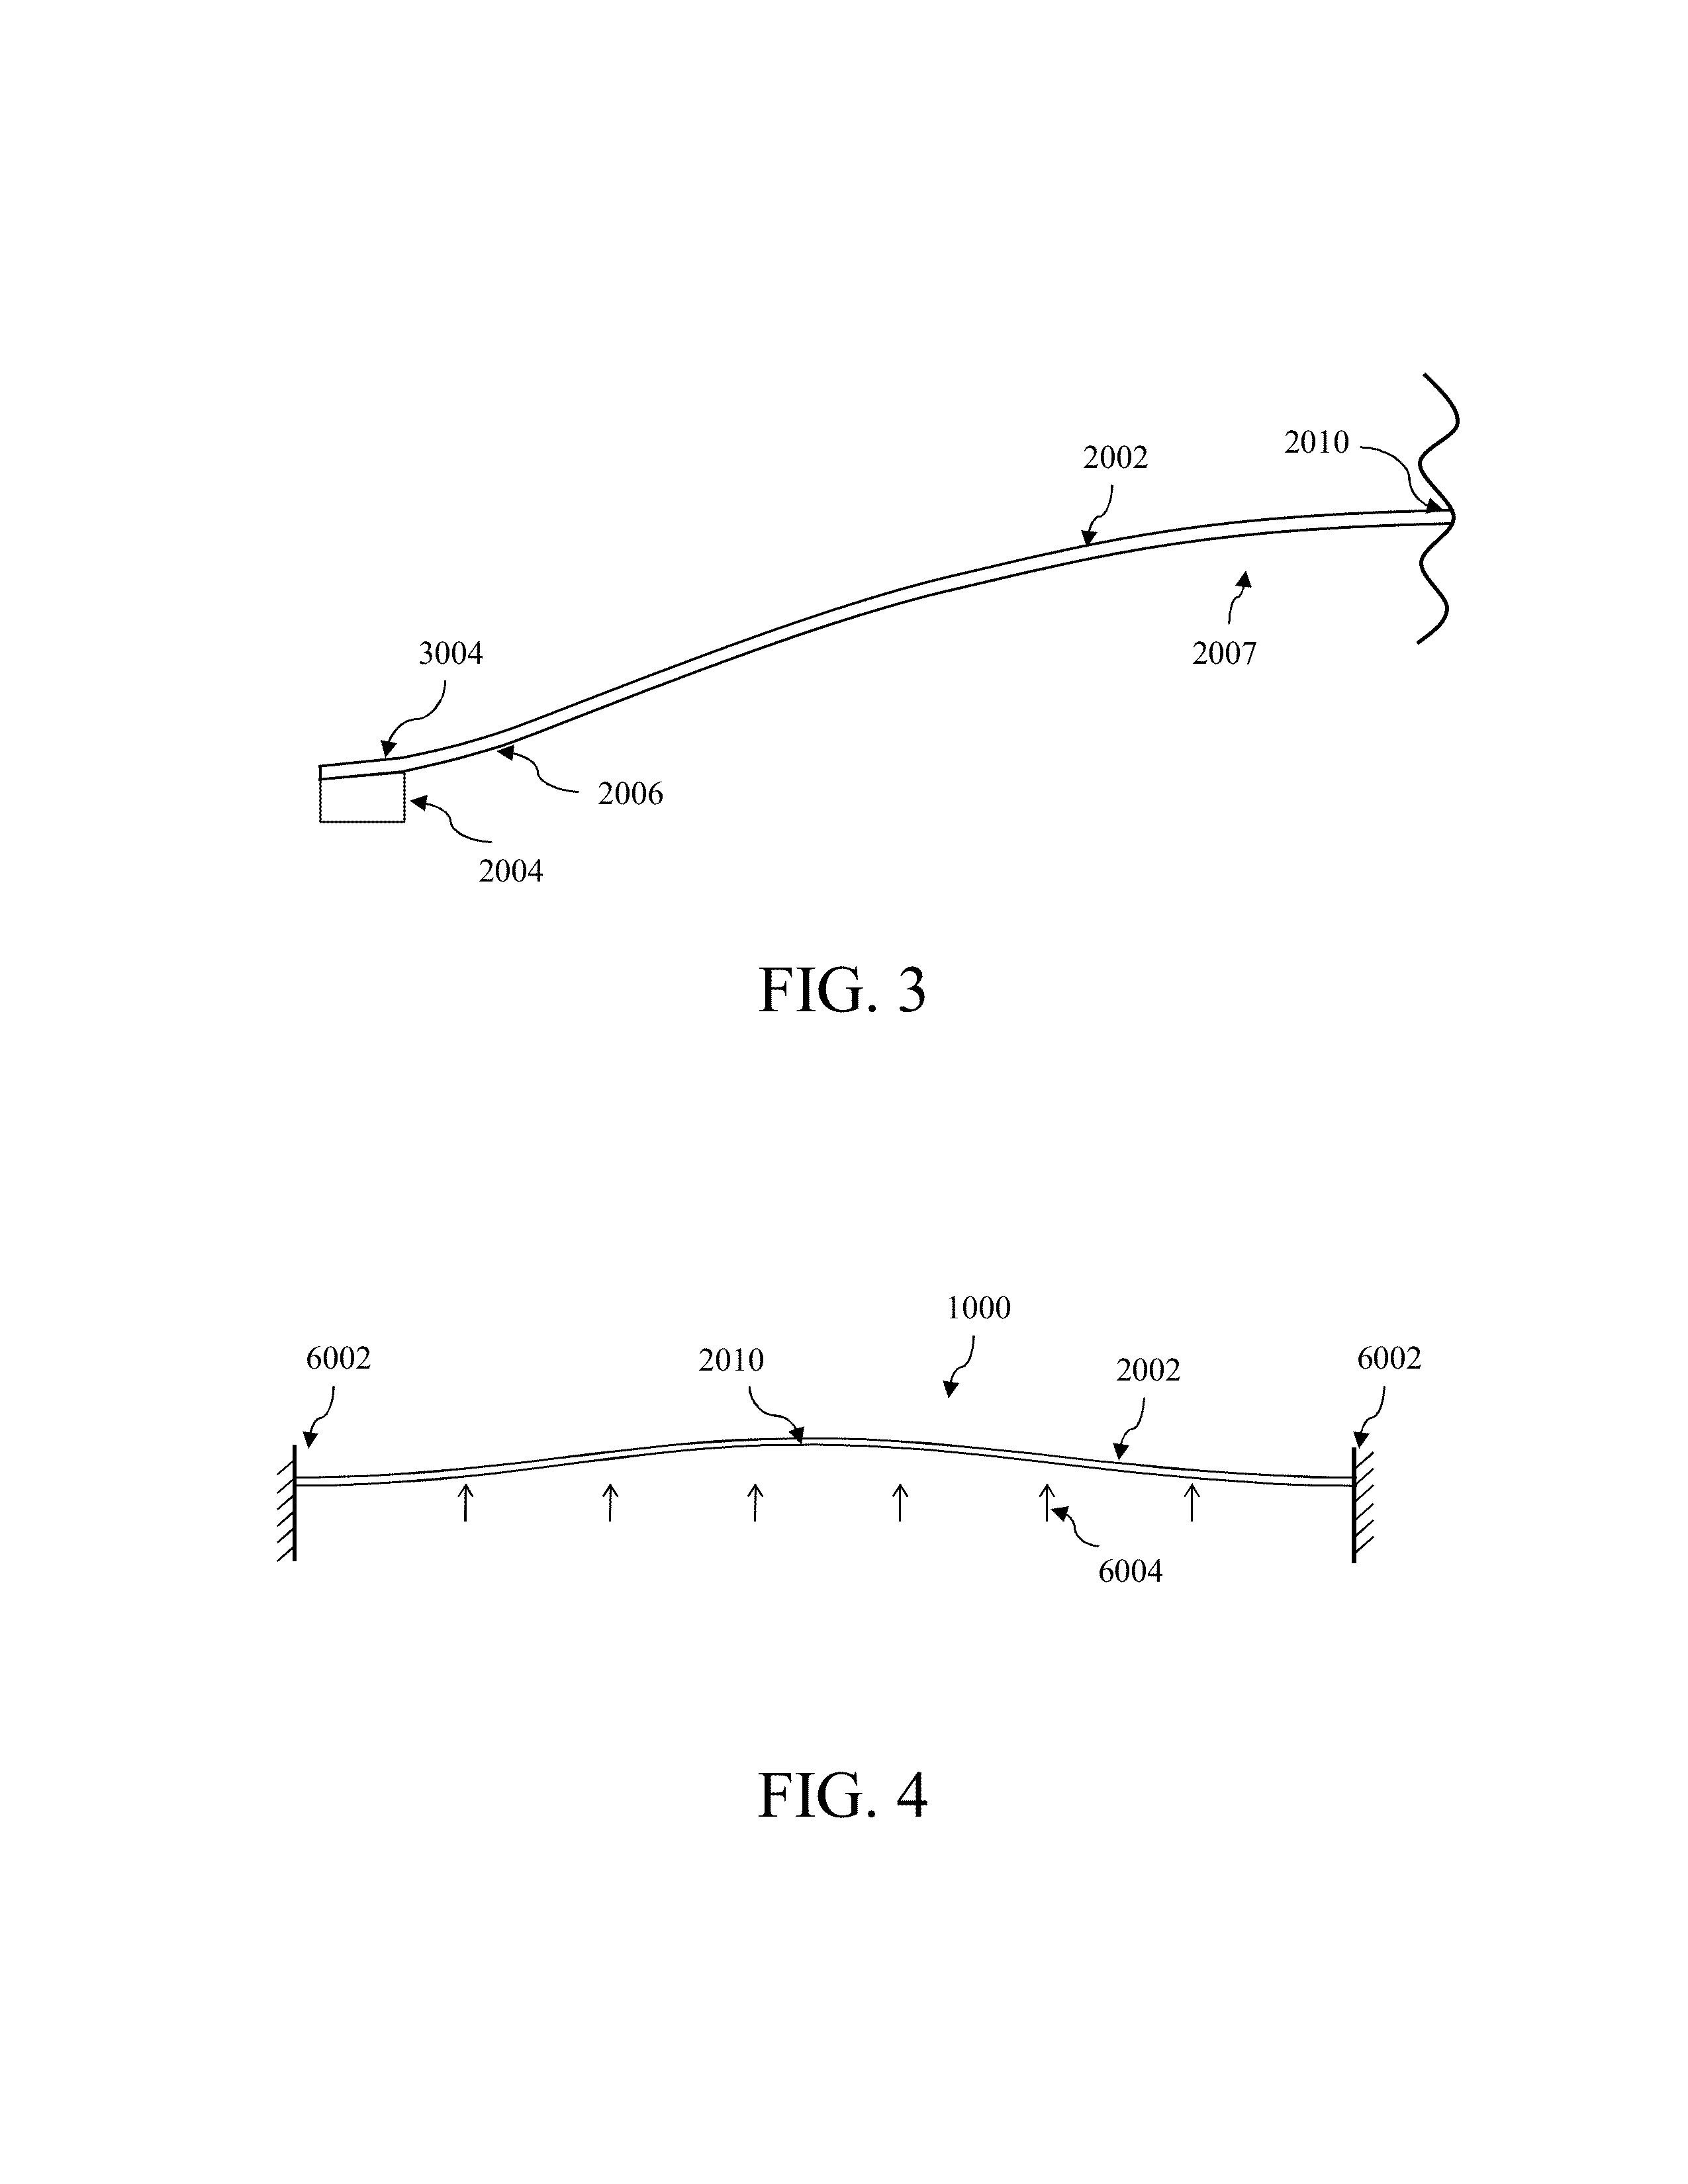 Adaptive optical devices with controllable focal power and aspheric shape